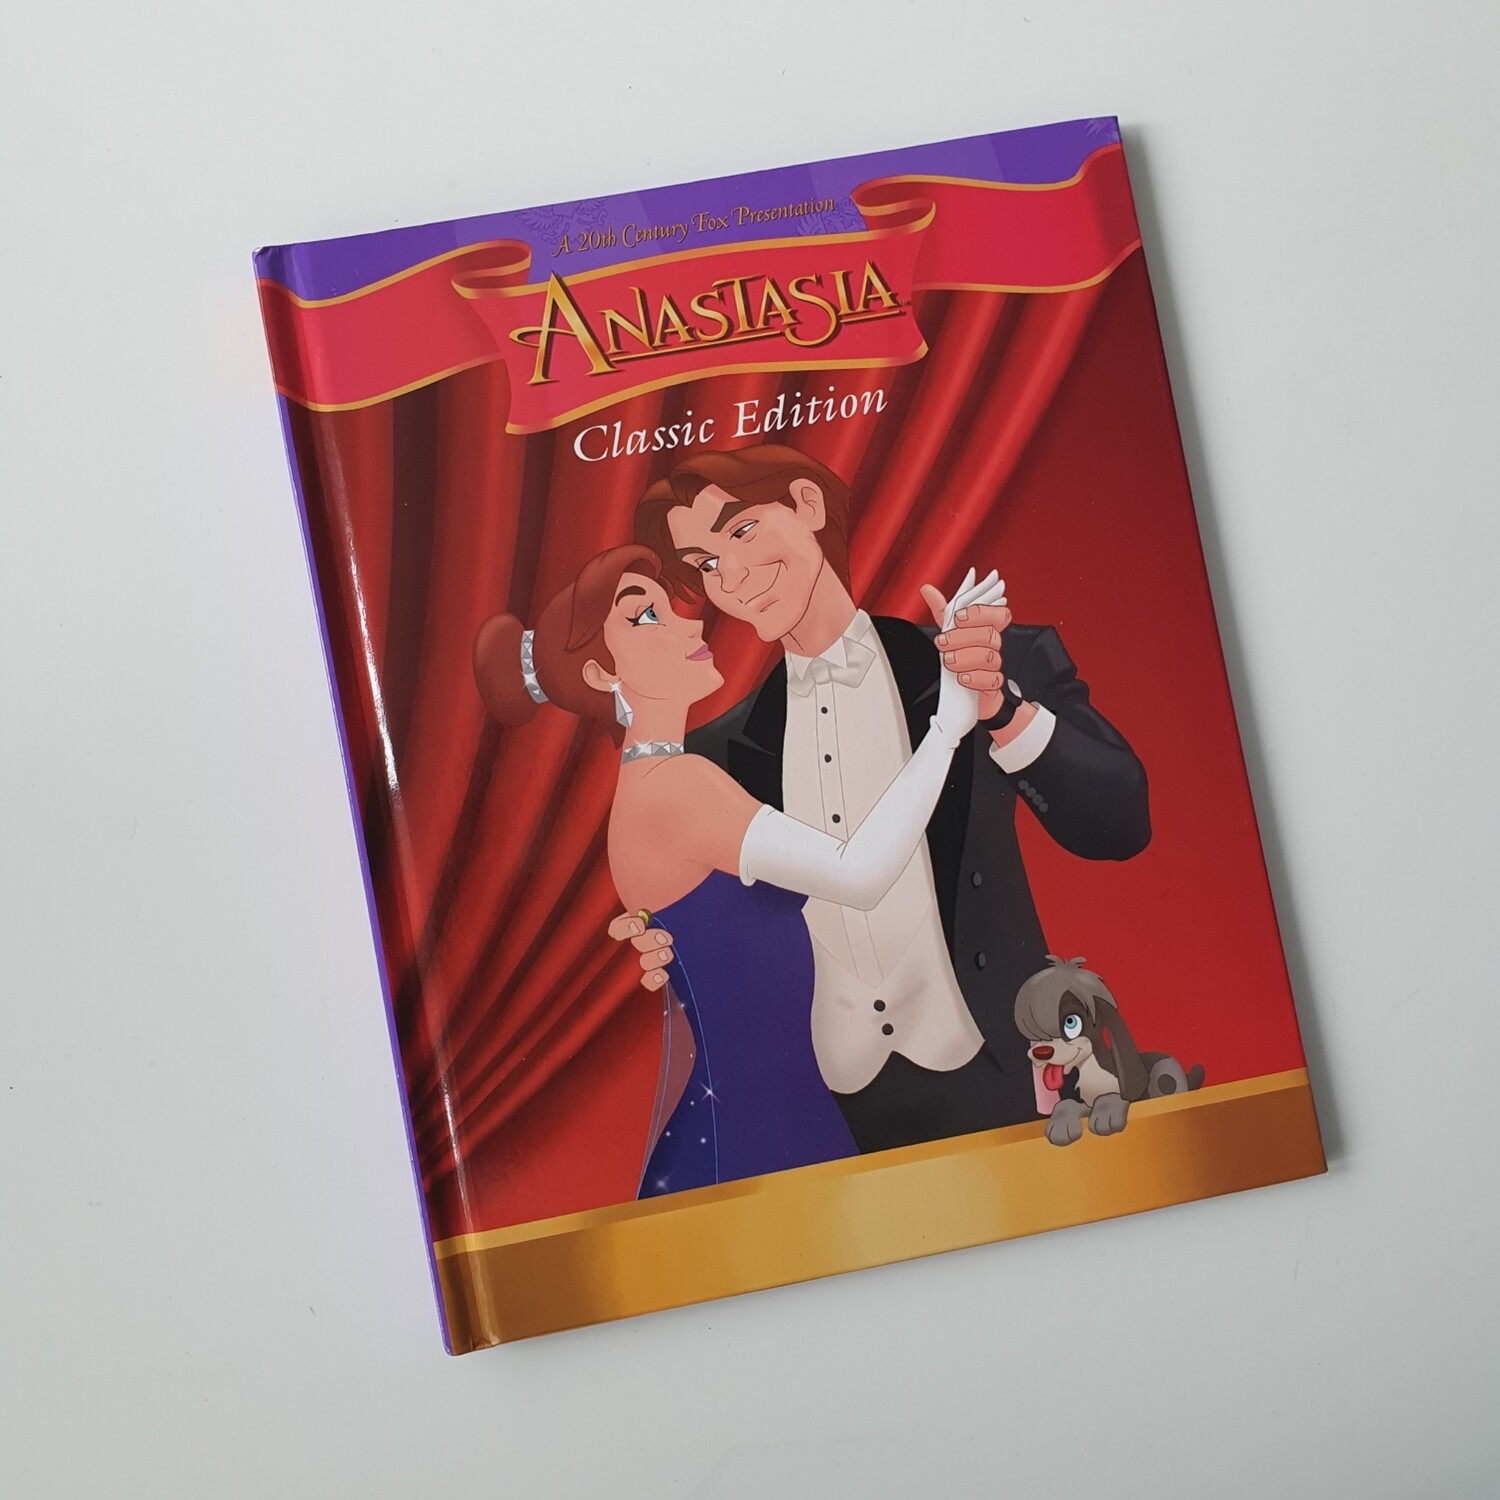 Anastasia Notebook - made from a dust jacket